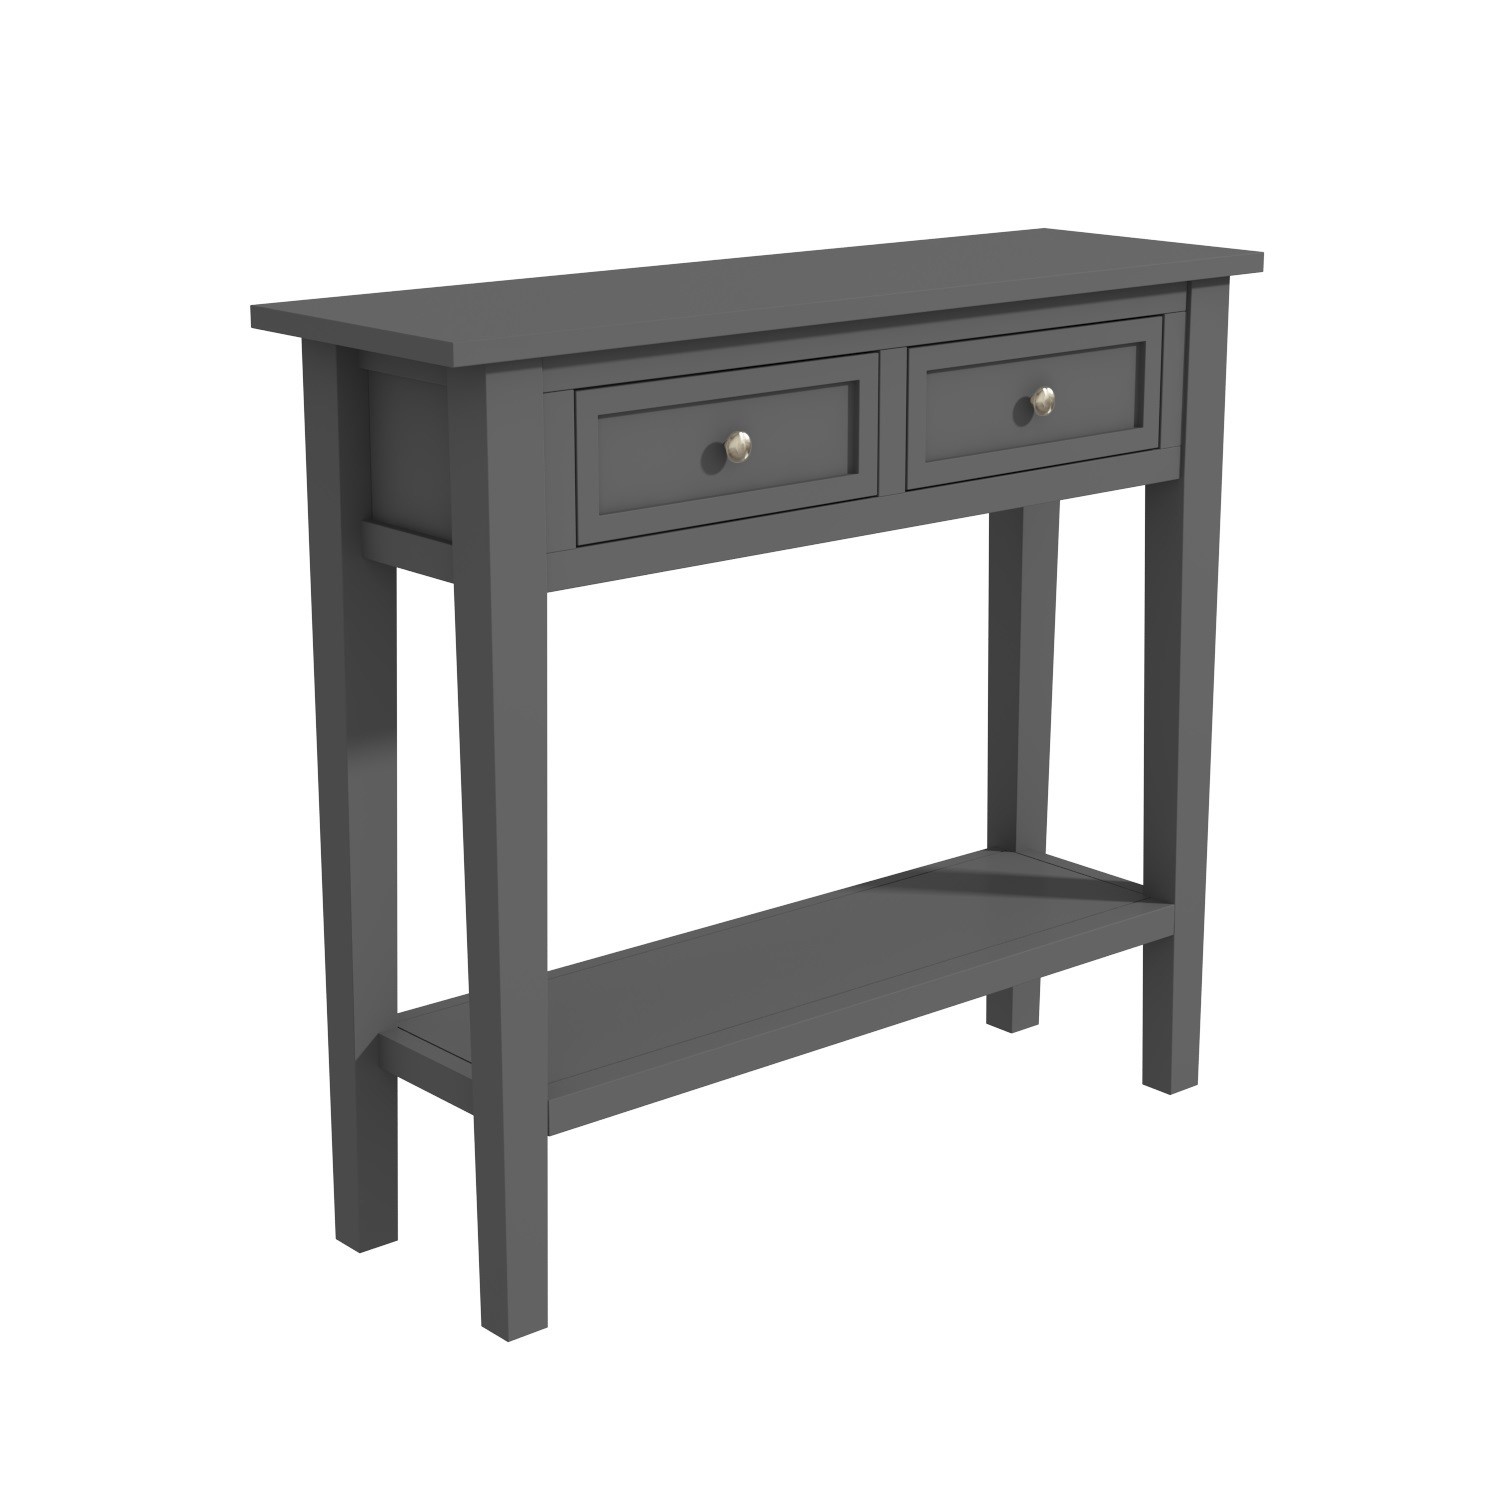 Narrow Grey Console Table With Drawers Elms Furniture123